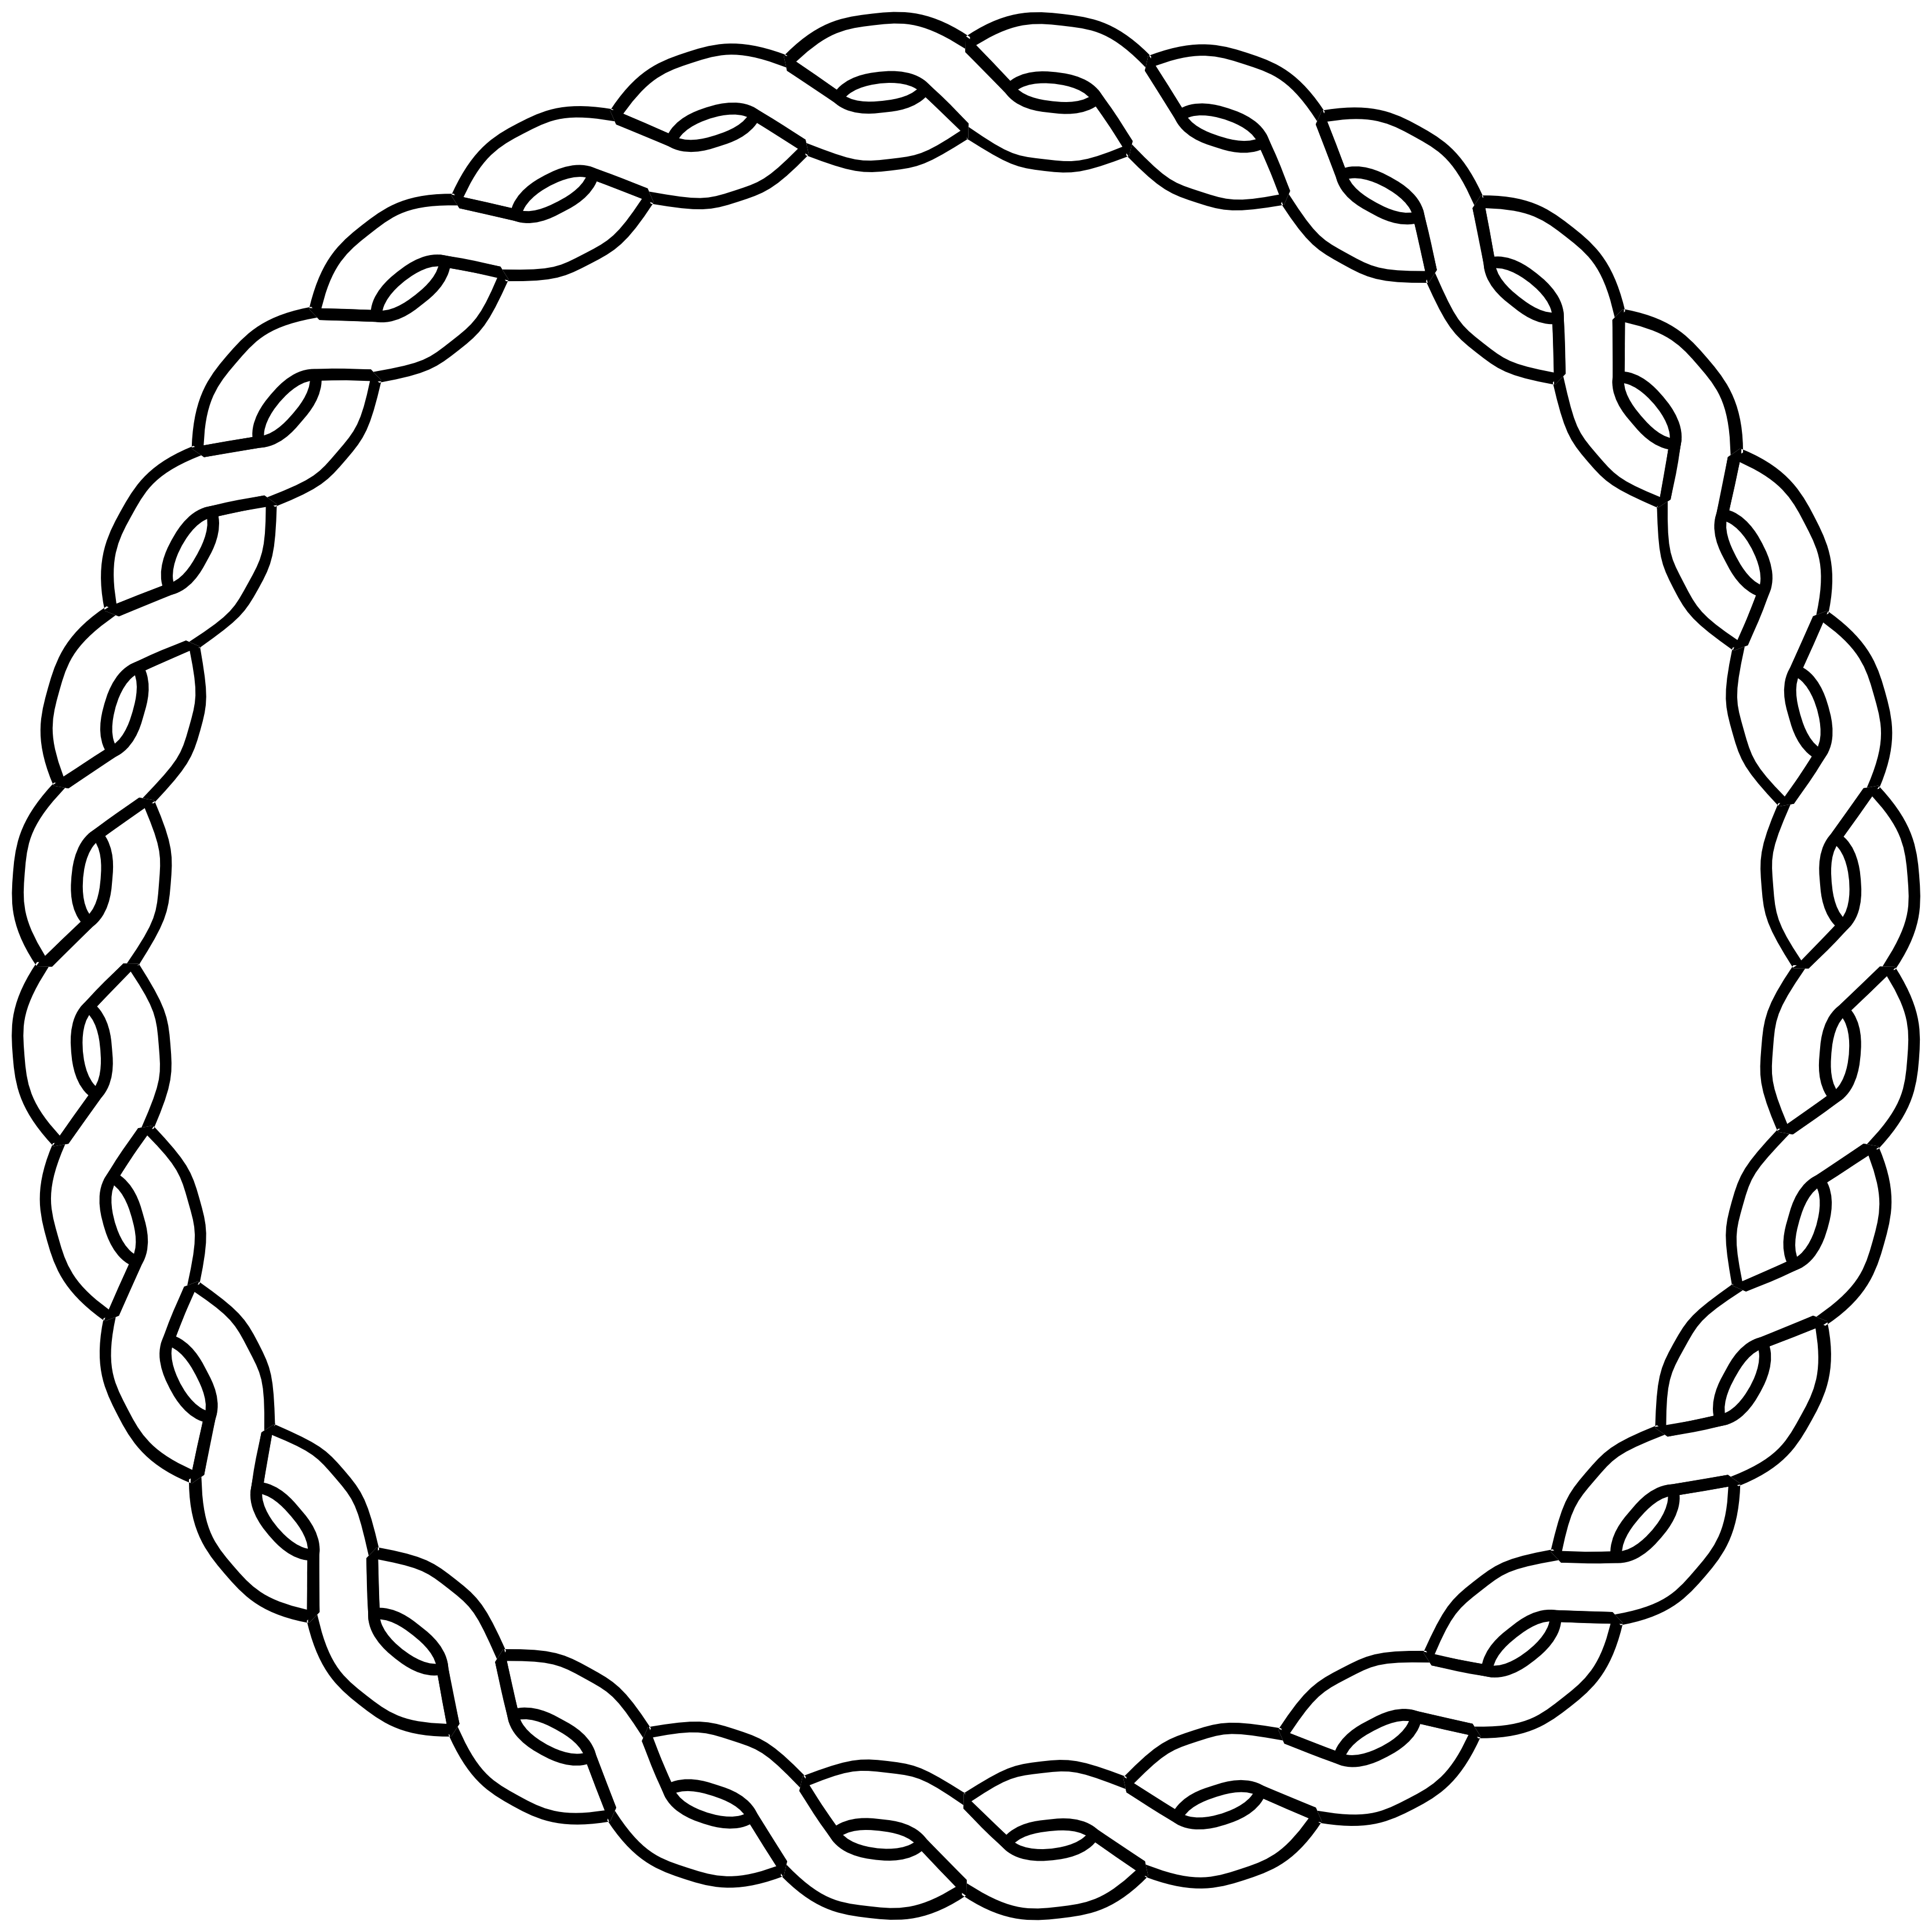 Oval Frame Clipart Black And White - Coin Border, Transparent background PNG HD thumbnail